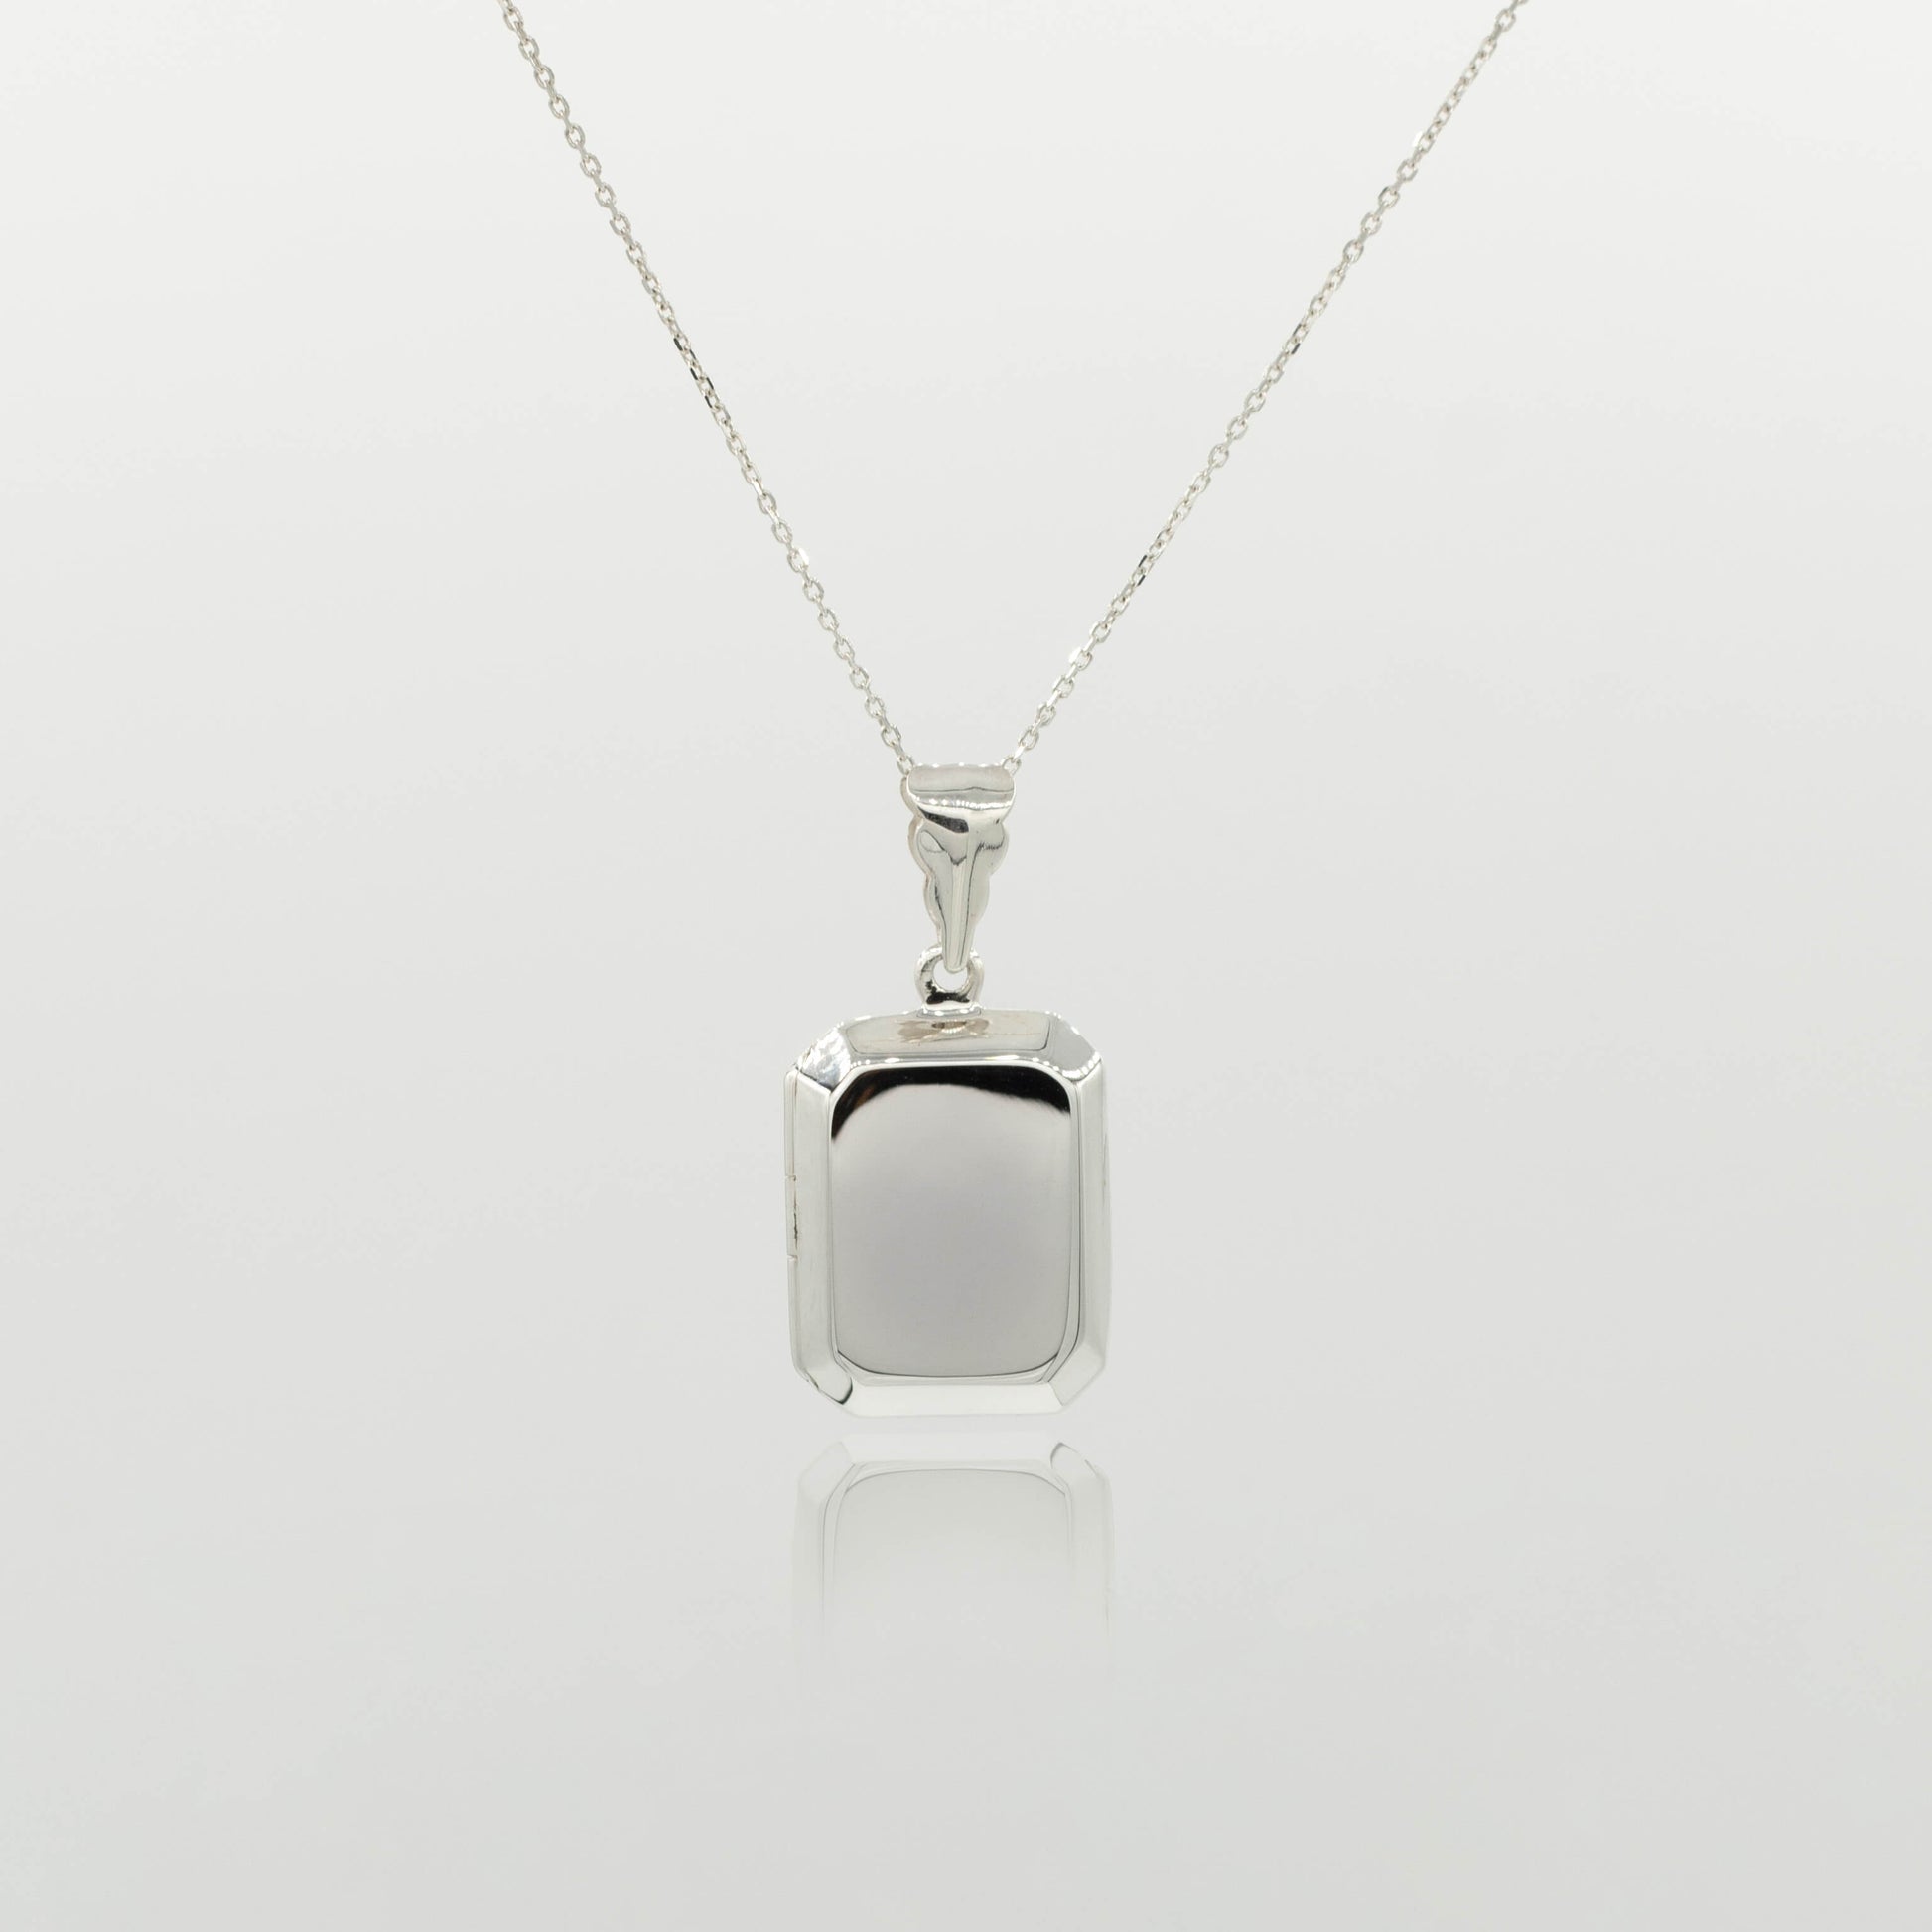 rectangular silver locket on a fine silver chain with a white background